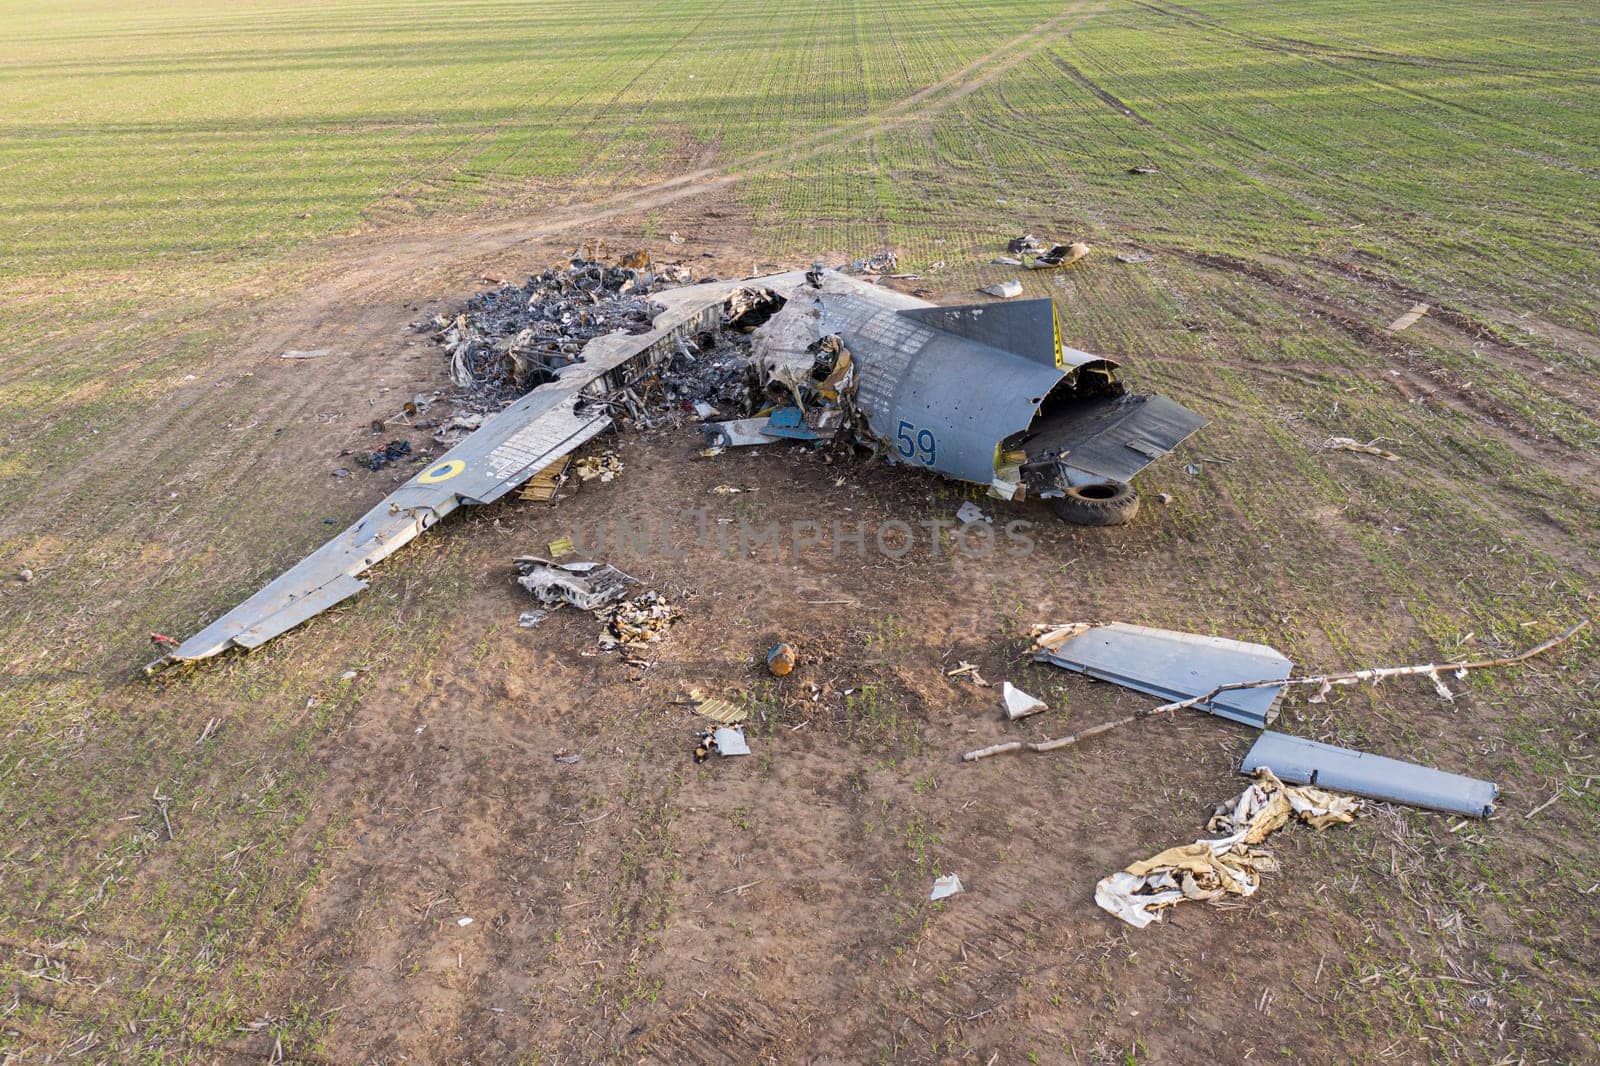 Aircraft an-26 accident on the field in Ukraine by Hris